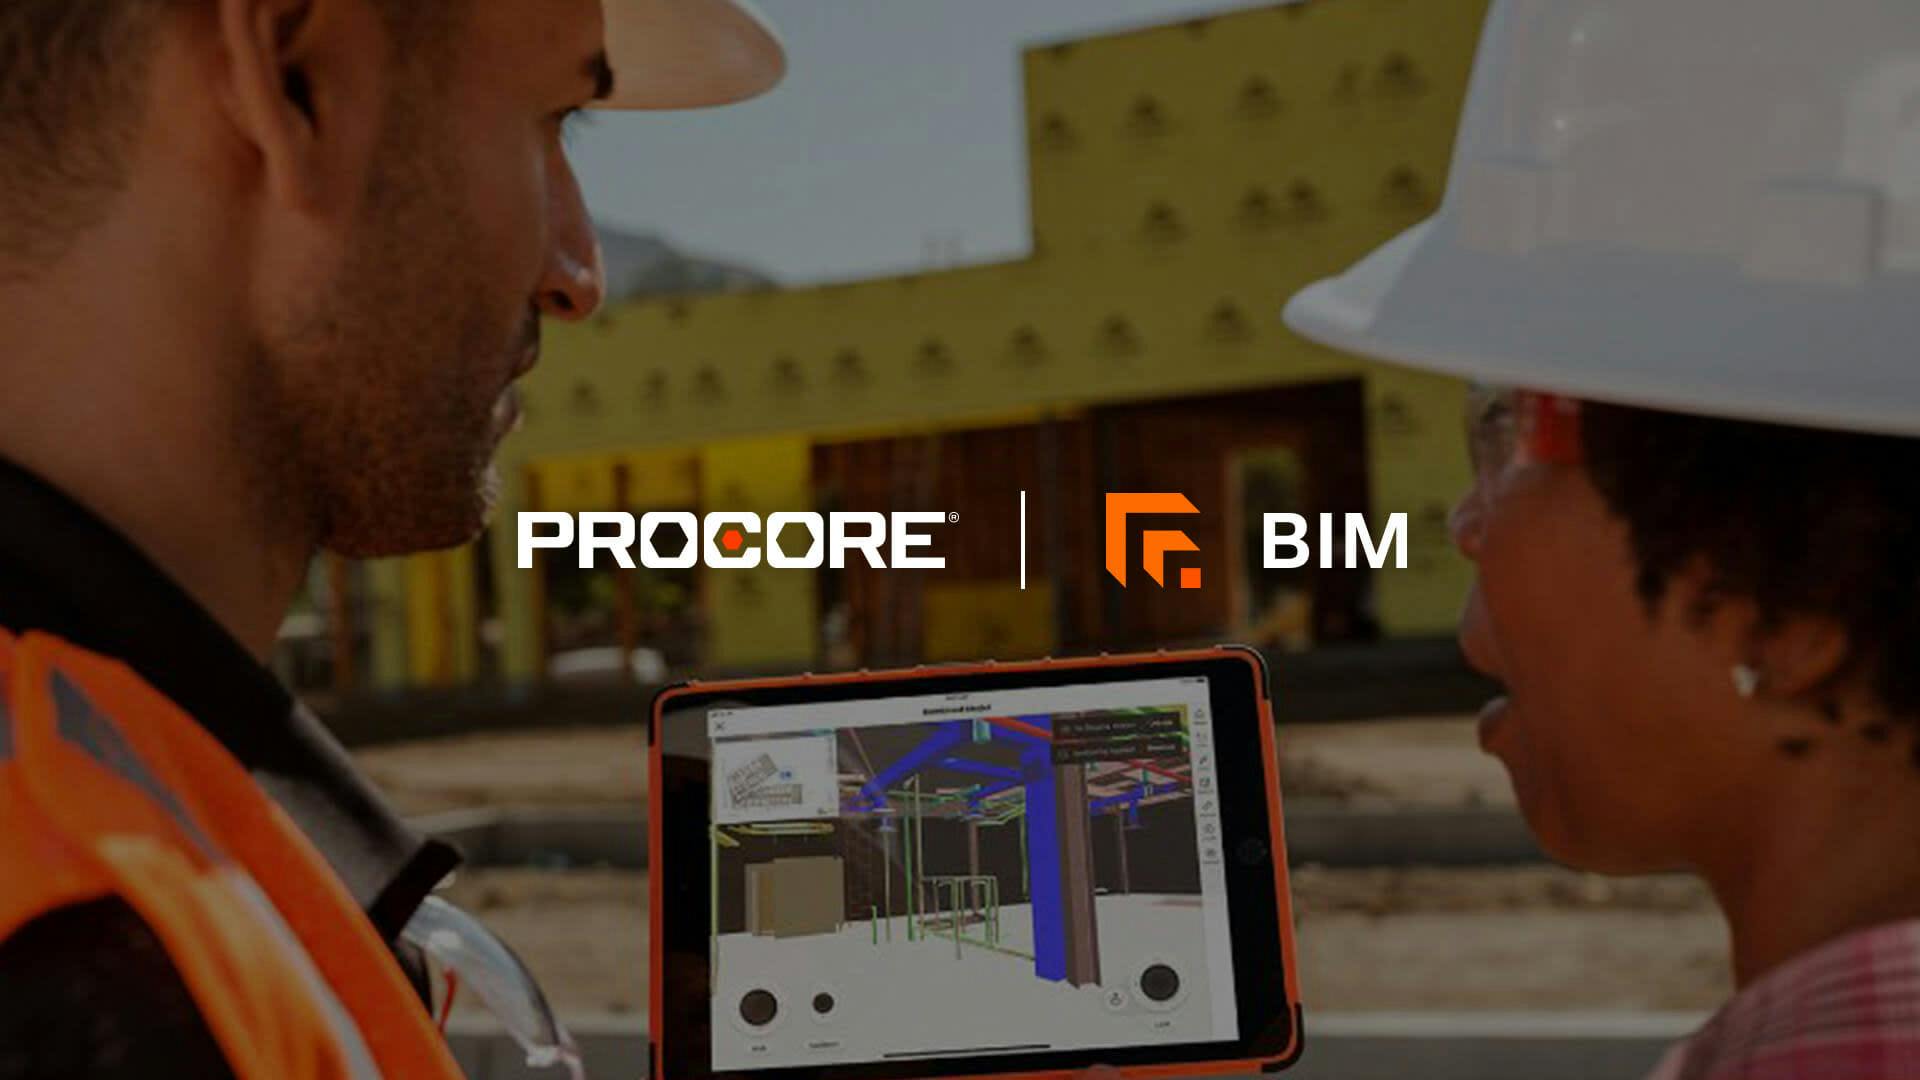 Procore BIM being used on a construction site